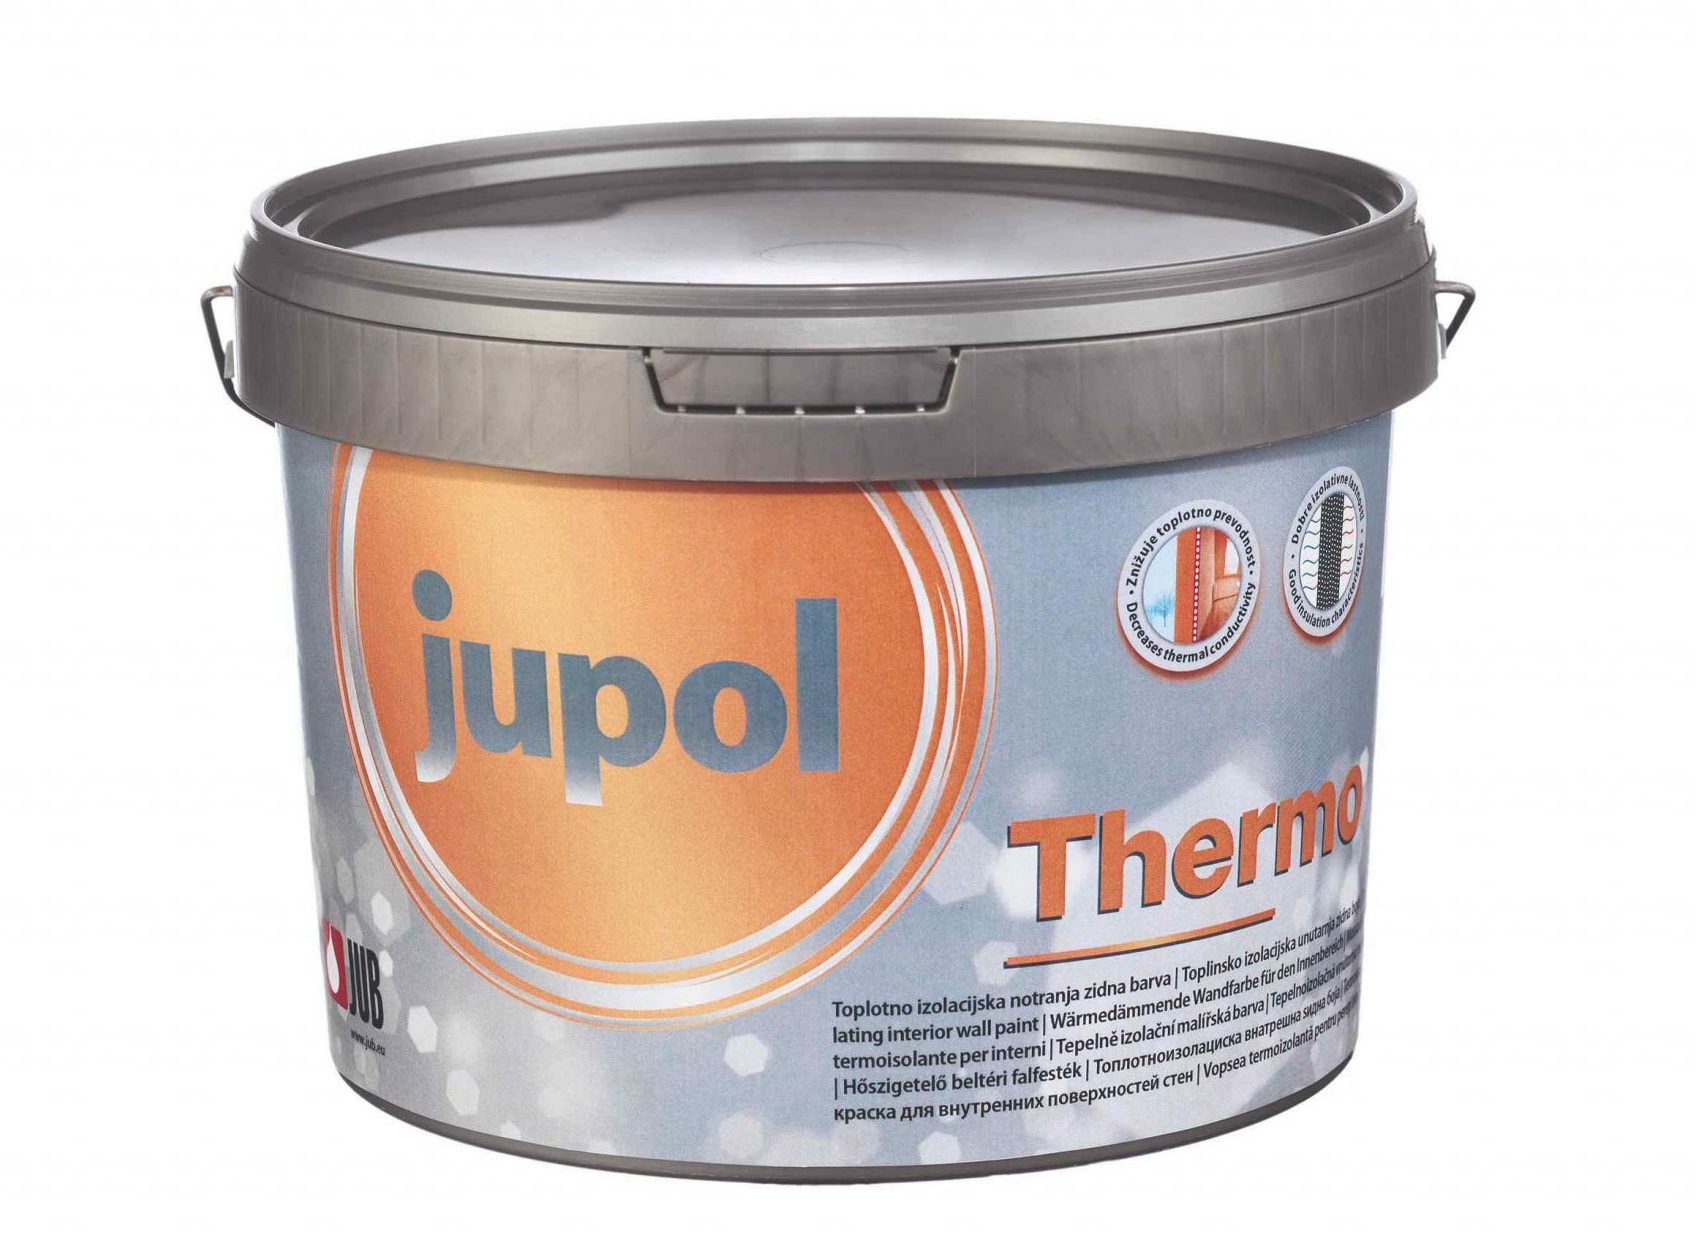 Jupol thermo 5L